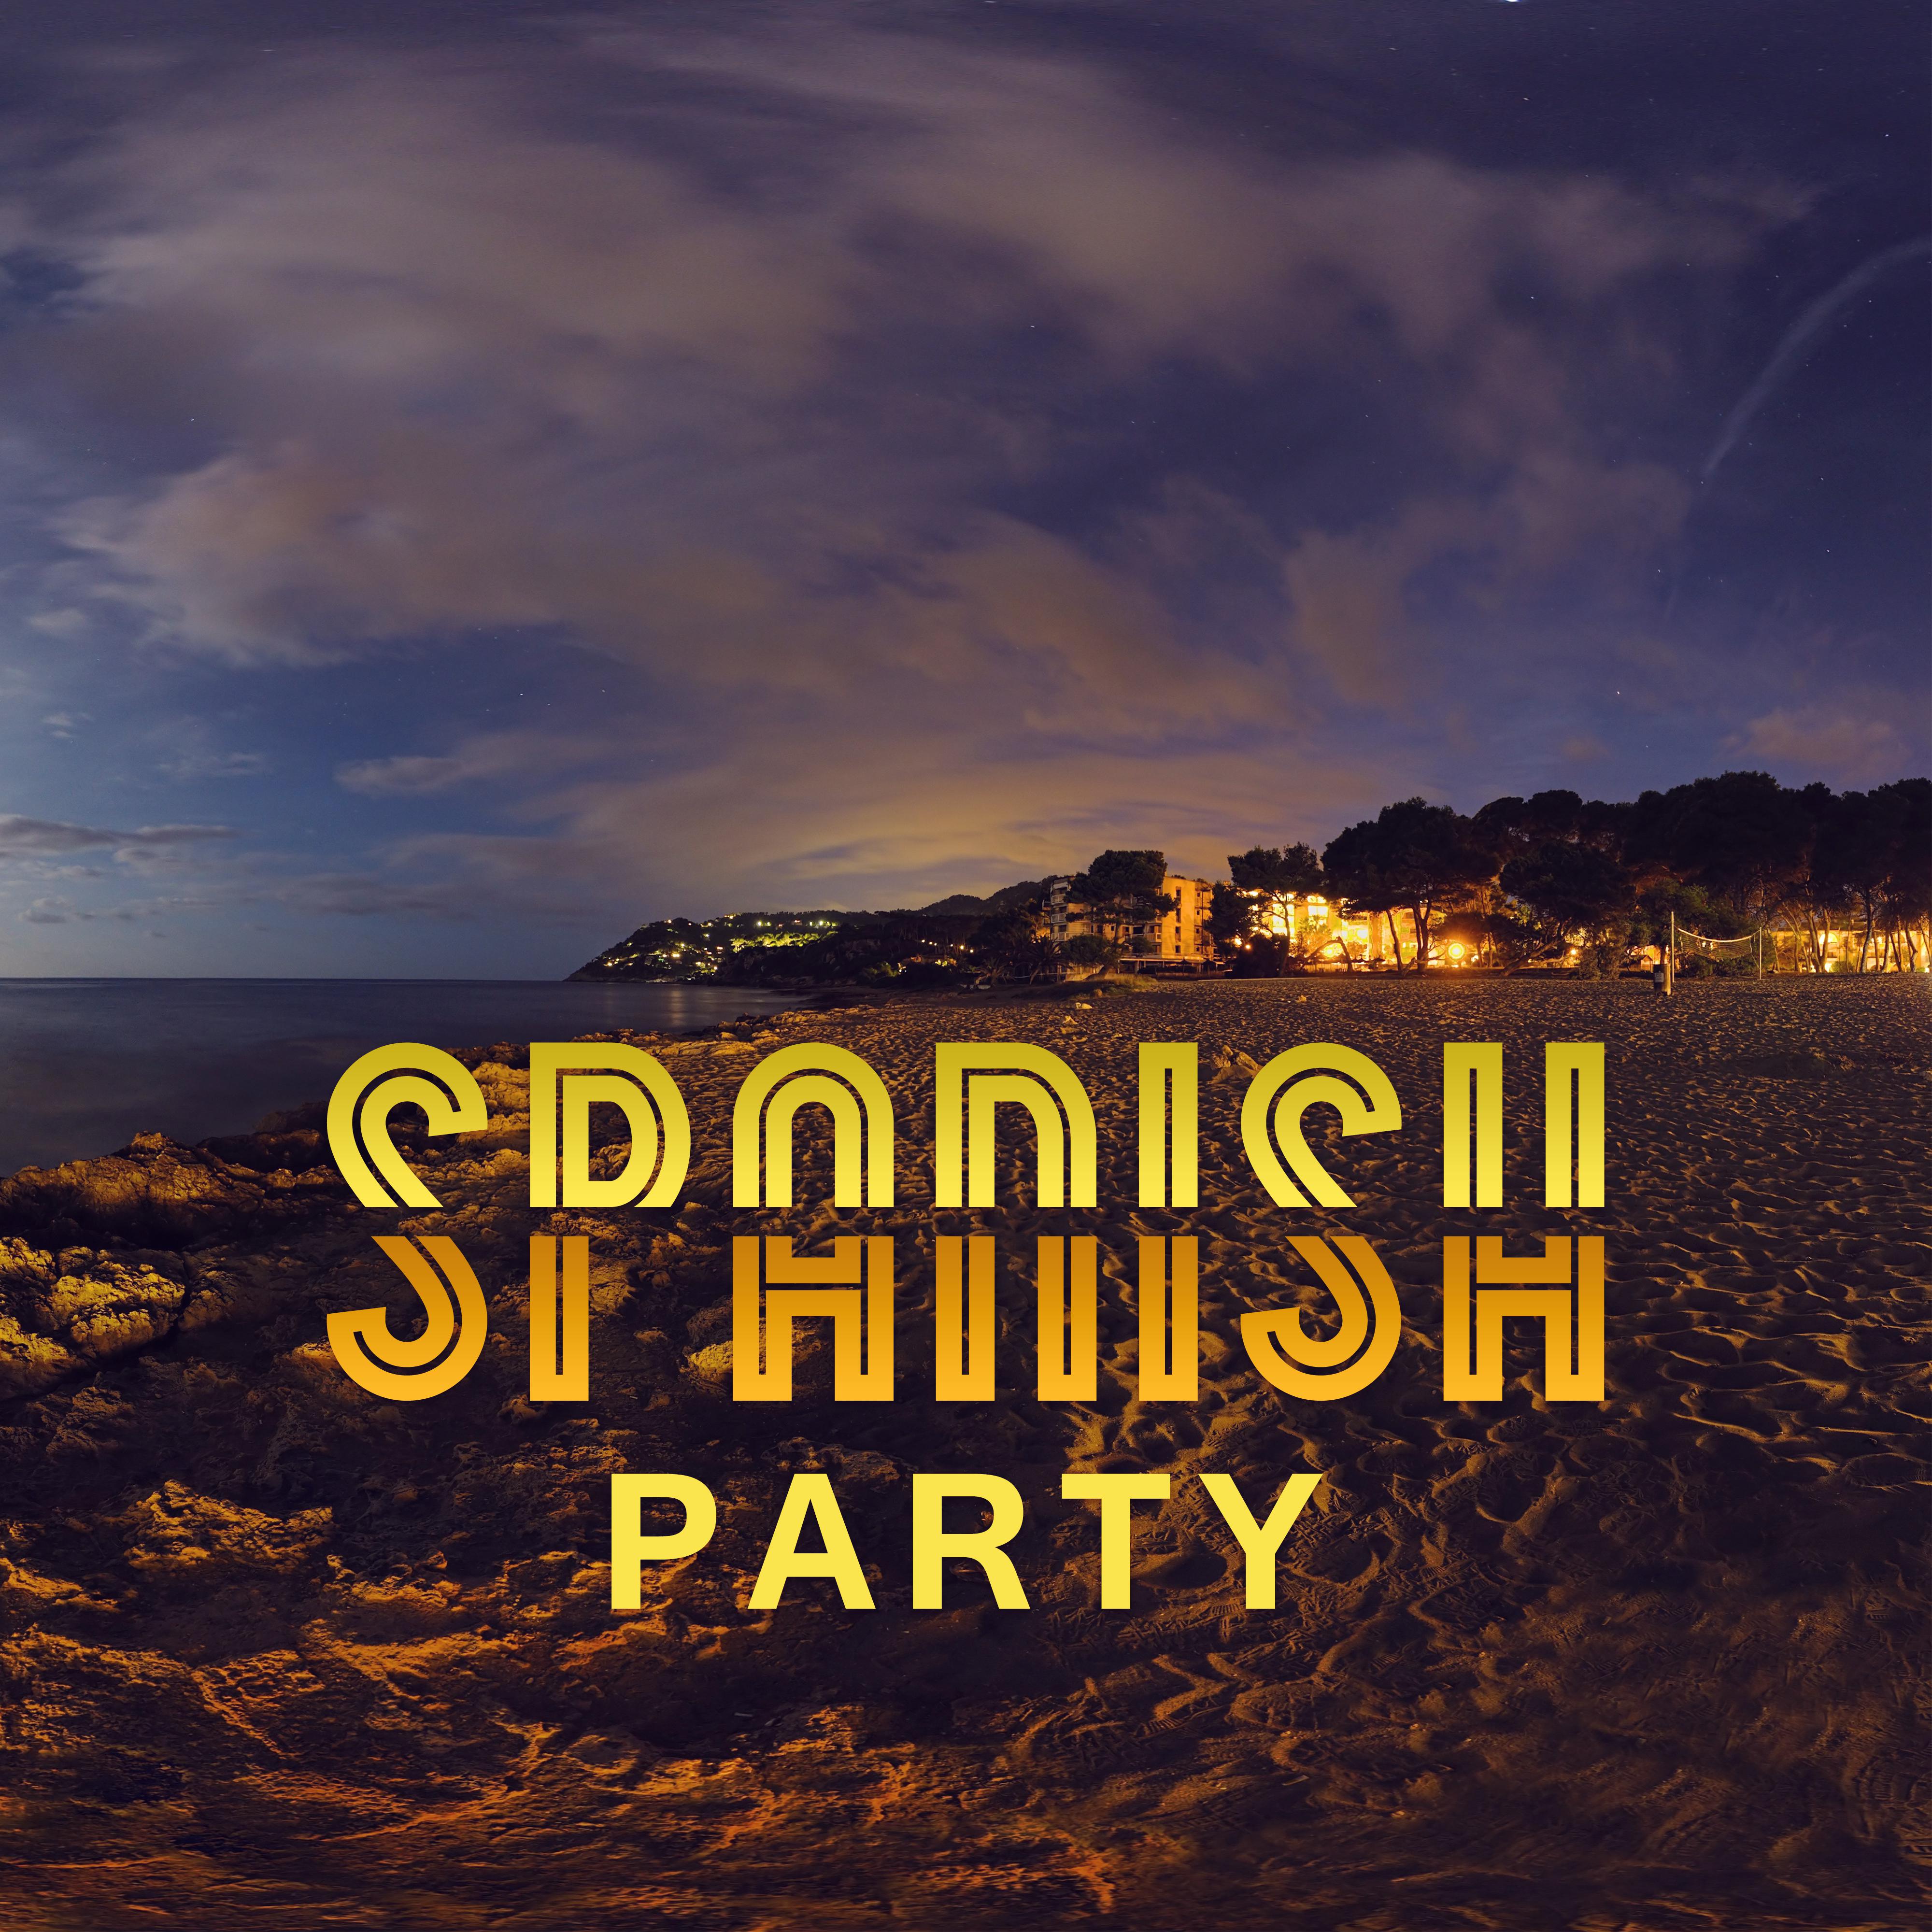 Spanish Party  Holiday Chill, Party Time, Beach Chill, Dancefloor, Good Vibes, Dance Party, Summertime 2017